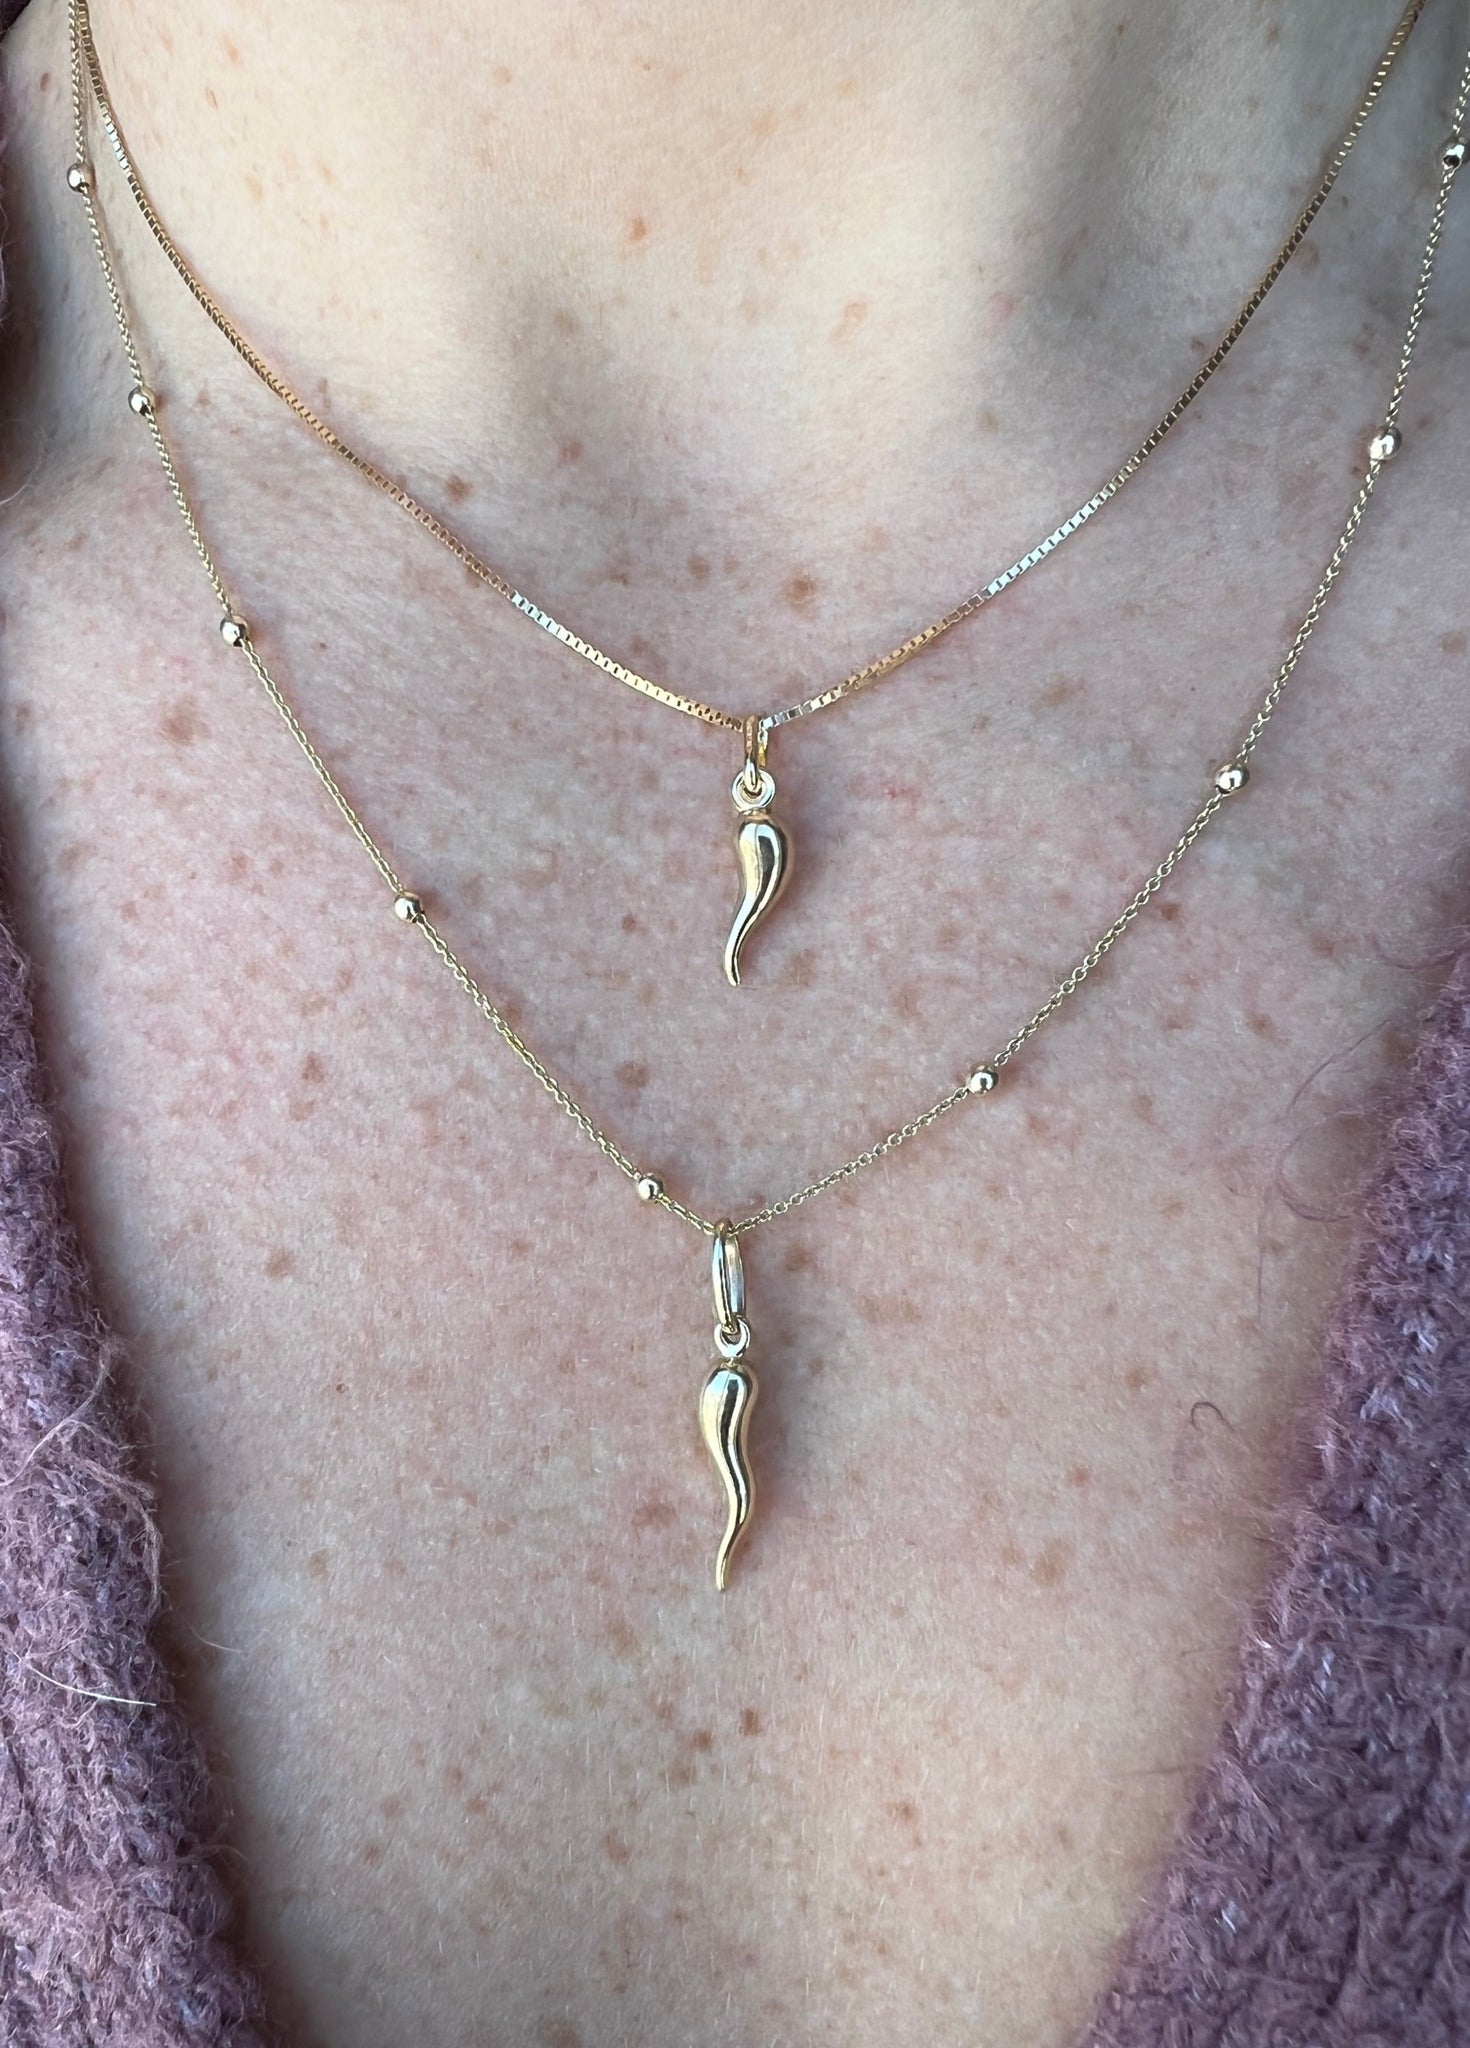 Woman wearing a variety of stylish necklaces, including the Cornicello charm by Lico Jewelry.